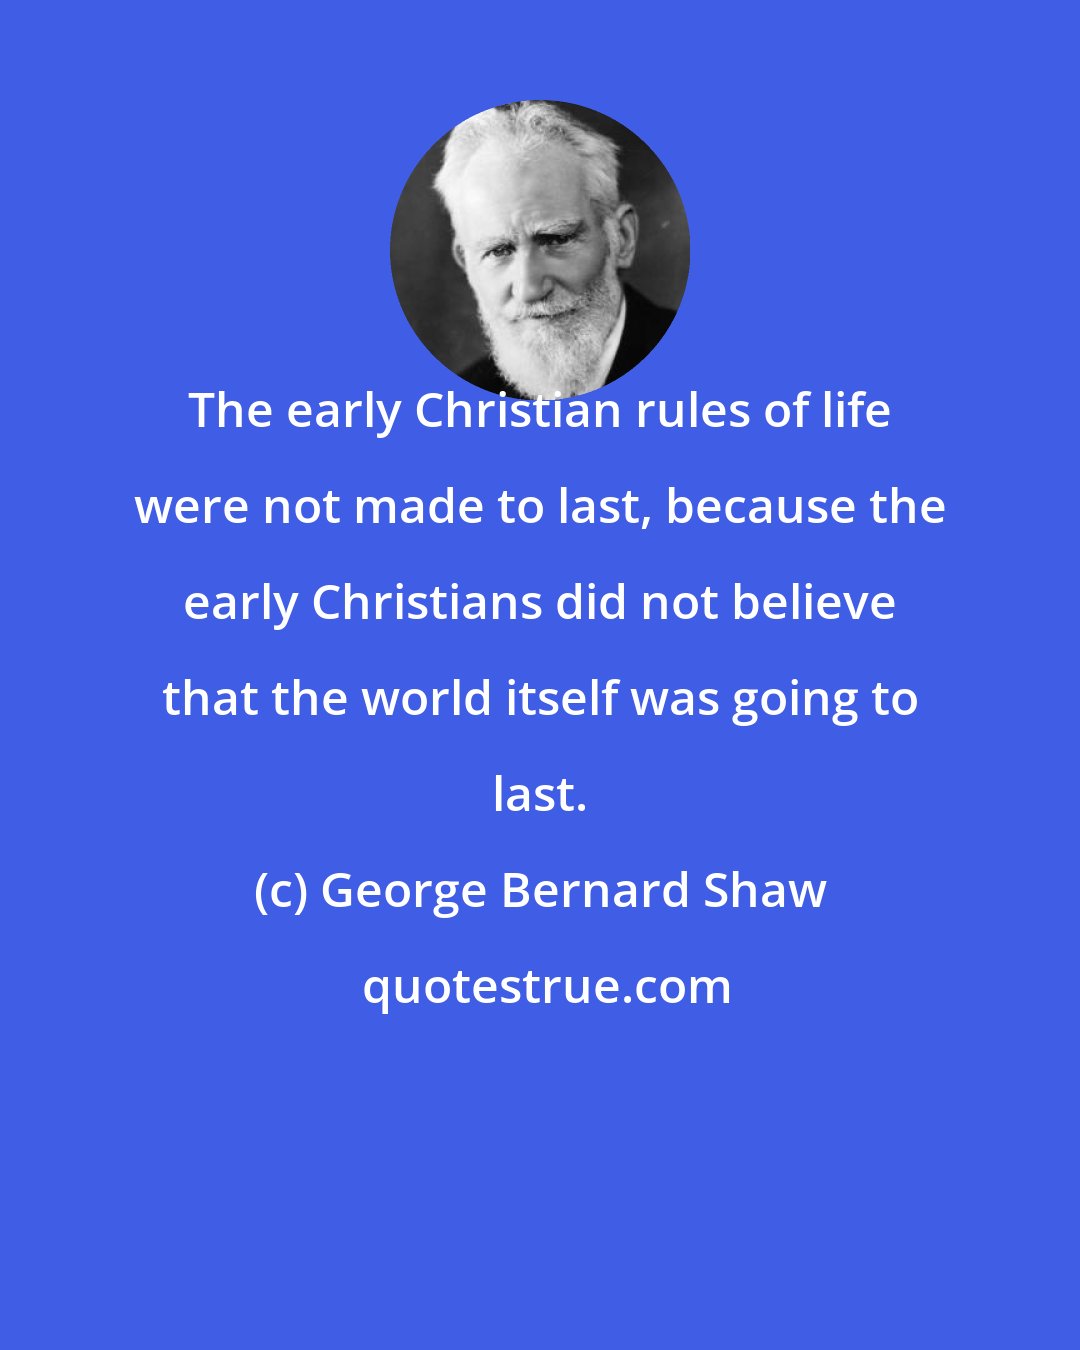 George Bernard Shaw: The early Christian rules of life were not made to last, because the early Christians did not believe that the world itself was going to last.